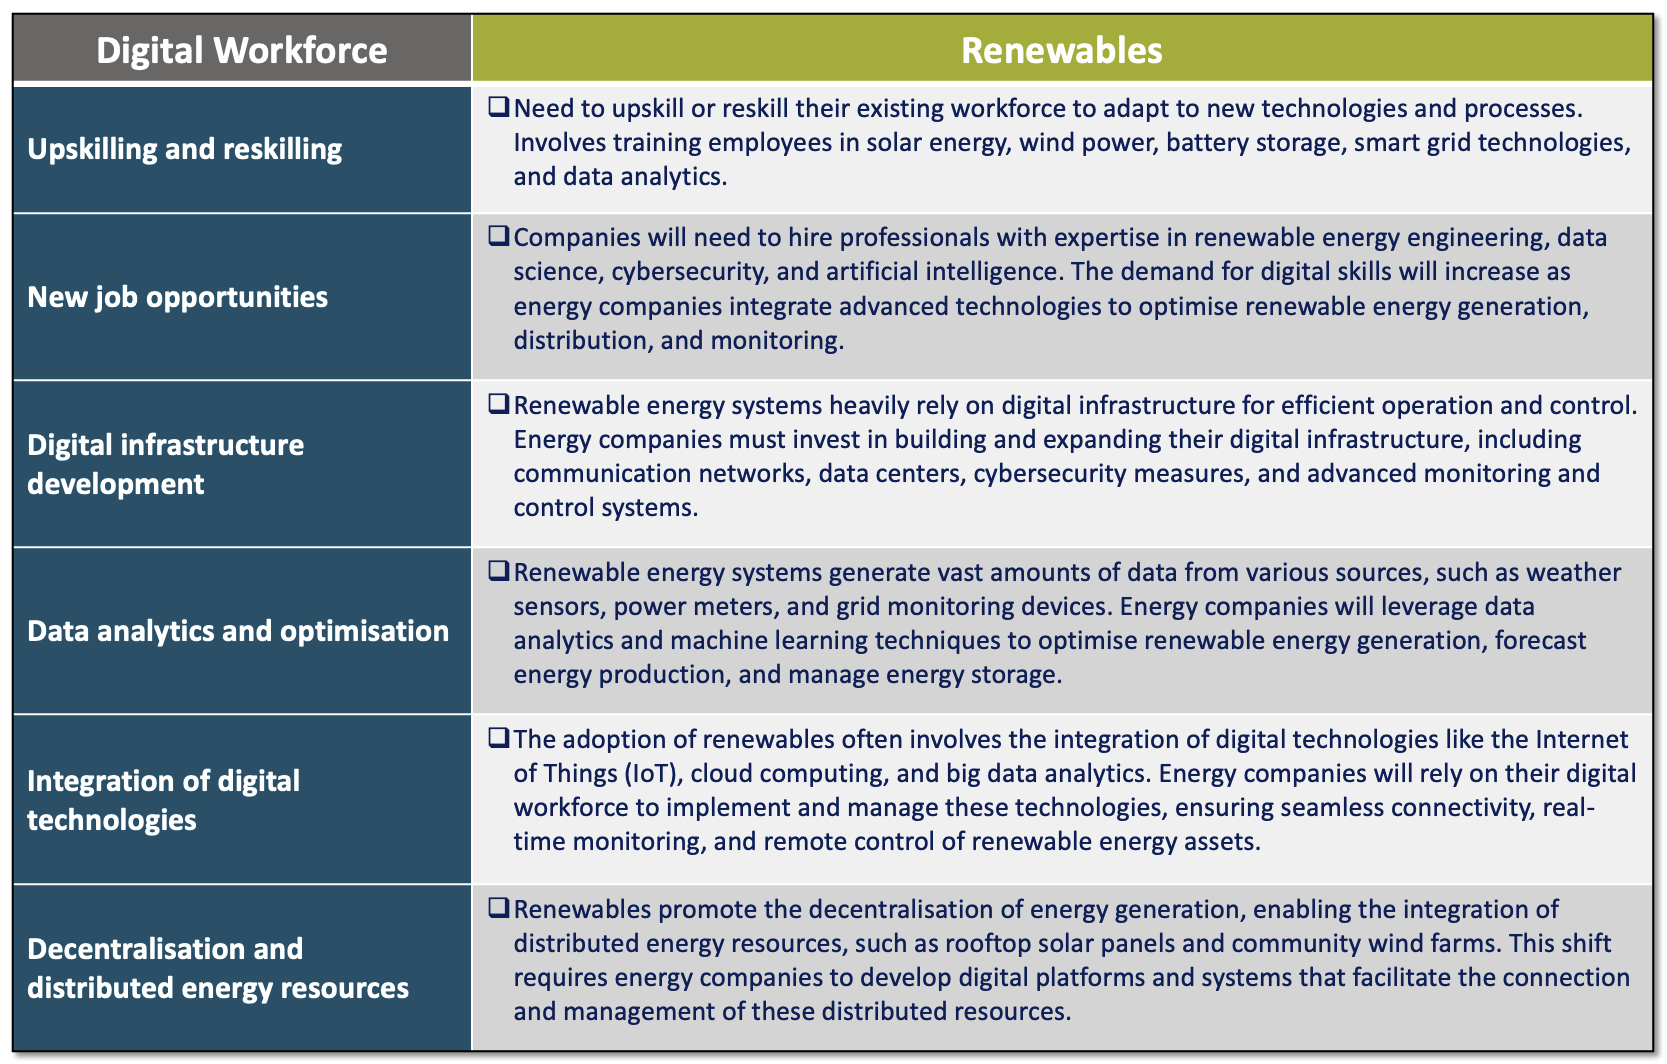 b. Key effects of the change to the digital workforce (Image: E&P Consulting)